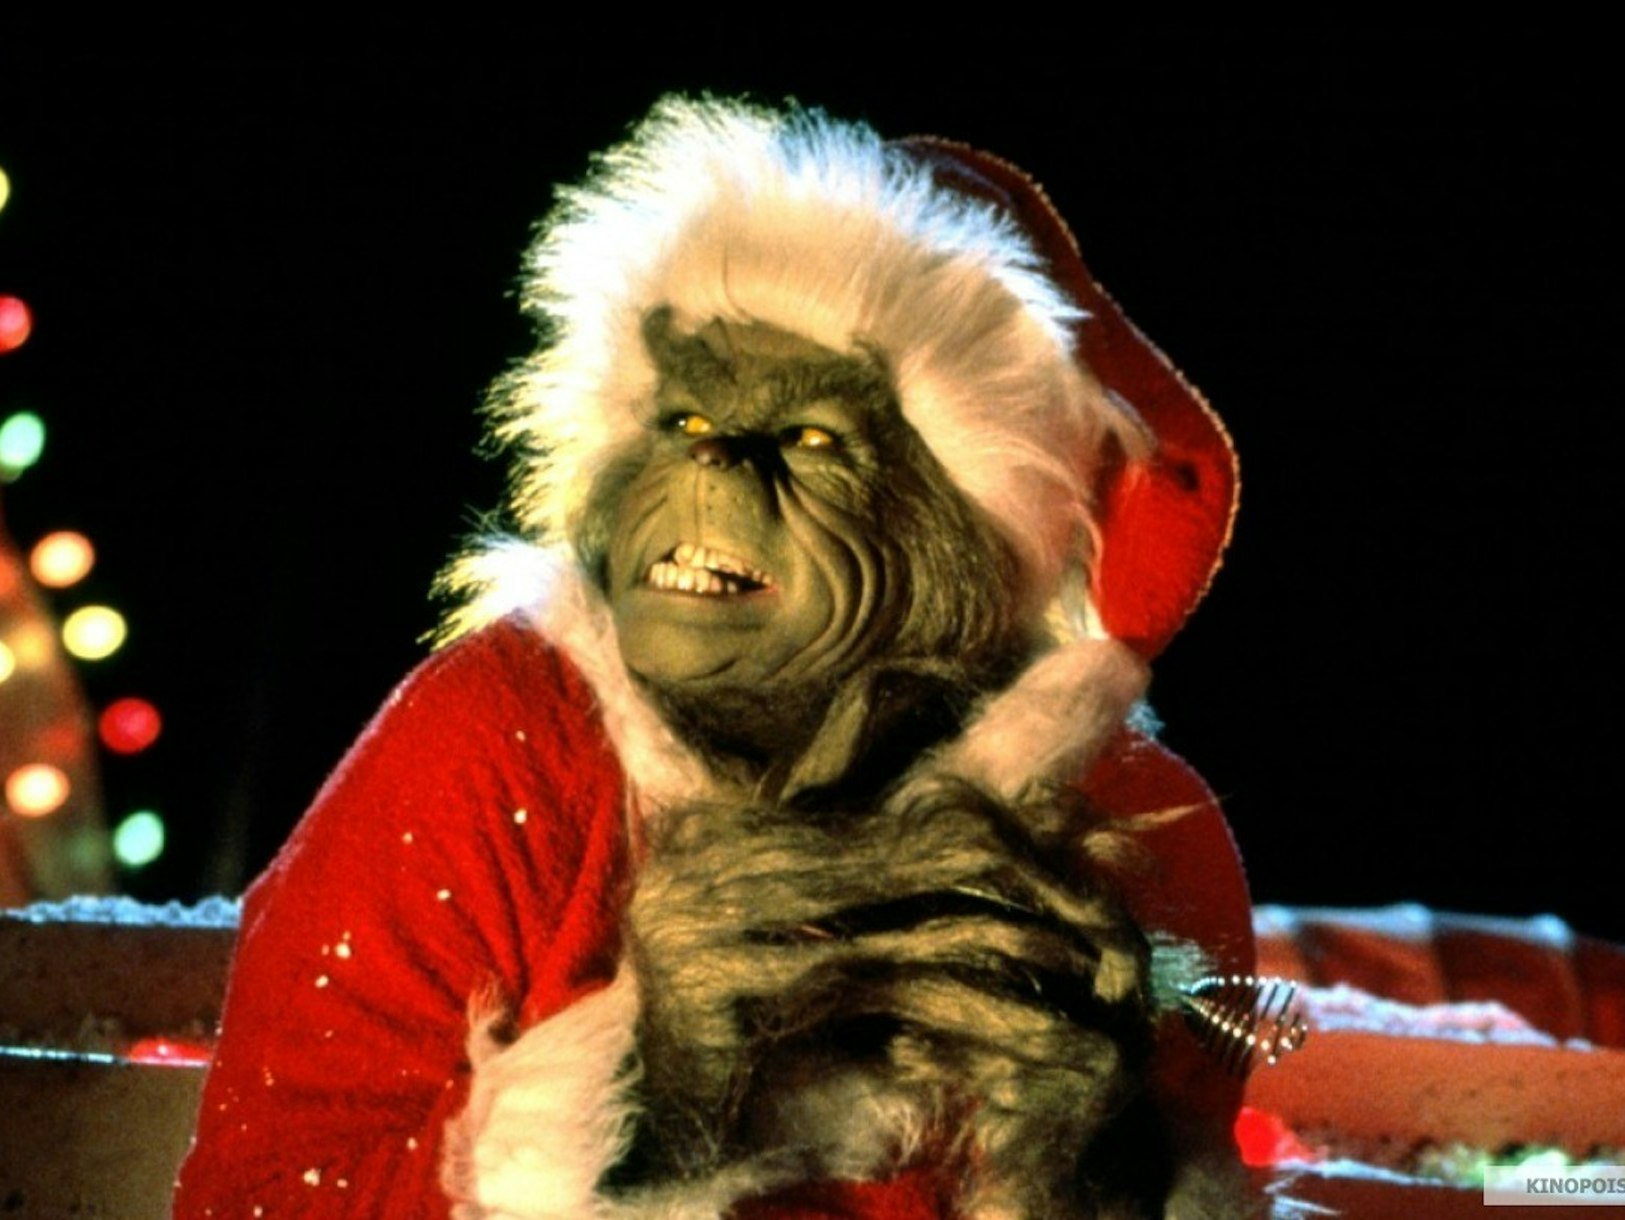 Why the Live Action 'How the Grinch Stole Christmas' Is the Best Inverse